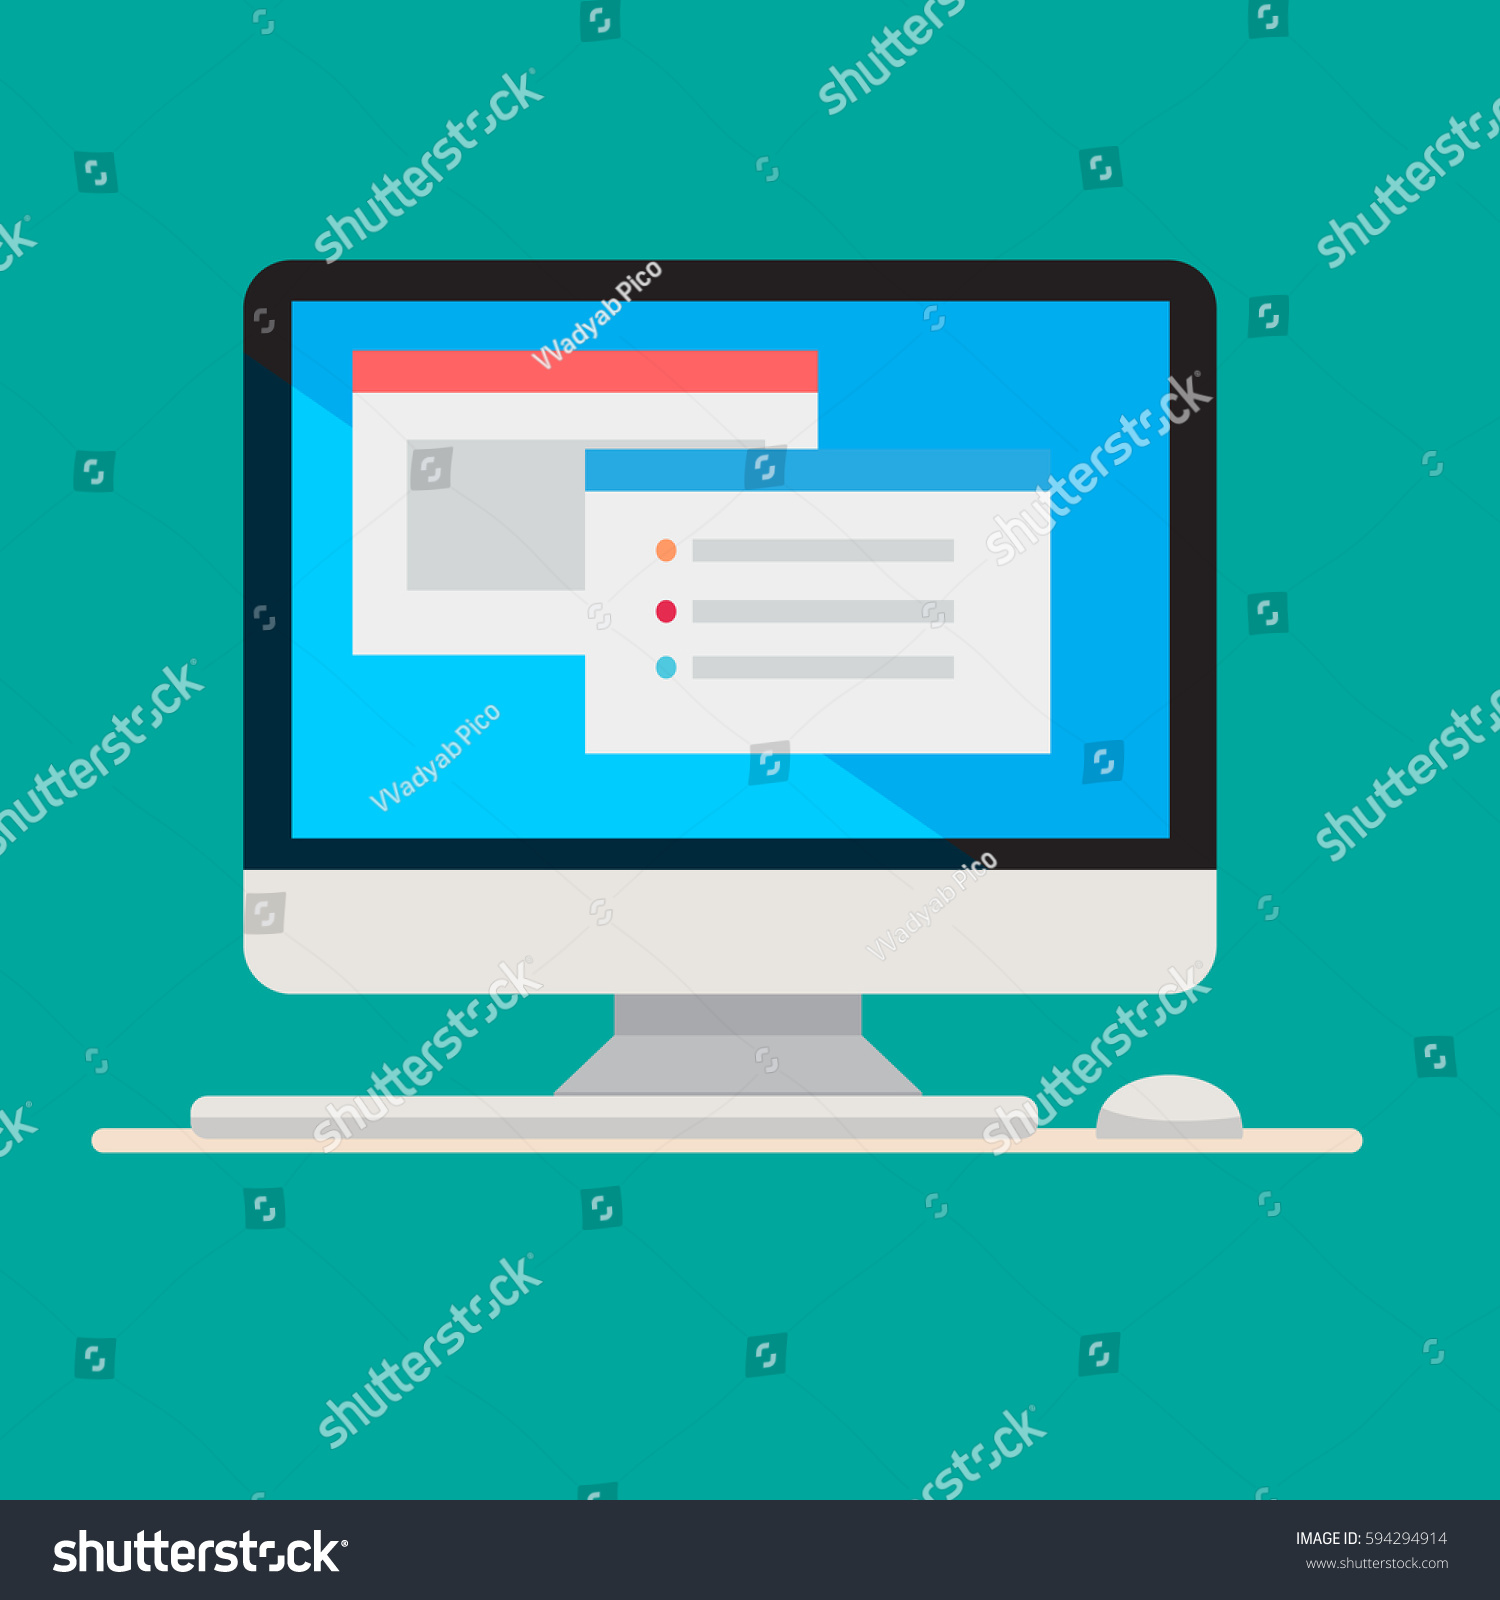 Flat computer design with keyboard and mouse on blue screen vector illustration. #594294914